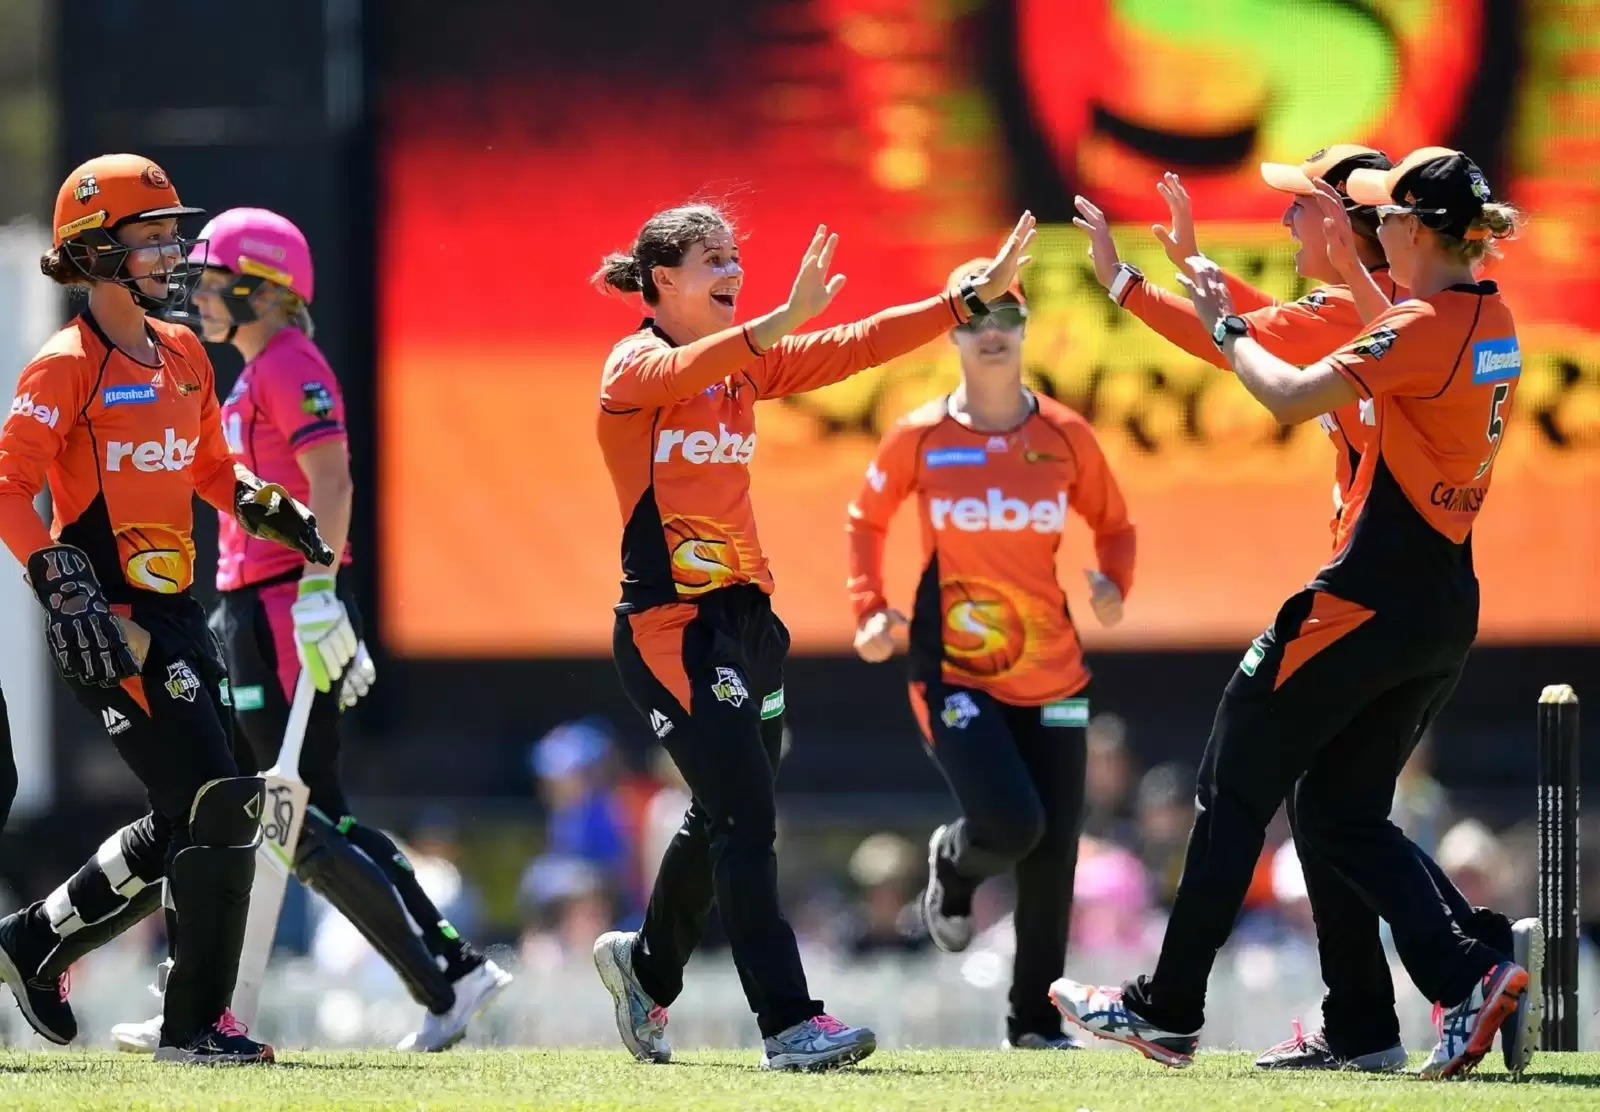 PSW vs STW Dream11 Prediction, WBBL 2019, Match 30: Preview, Fantasy Cricket Tips, Playing XI, Team, Pitch Report and Weather Conditions